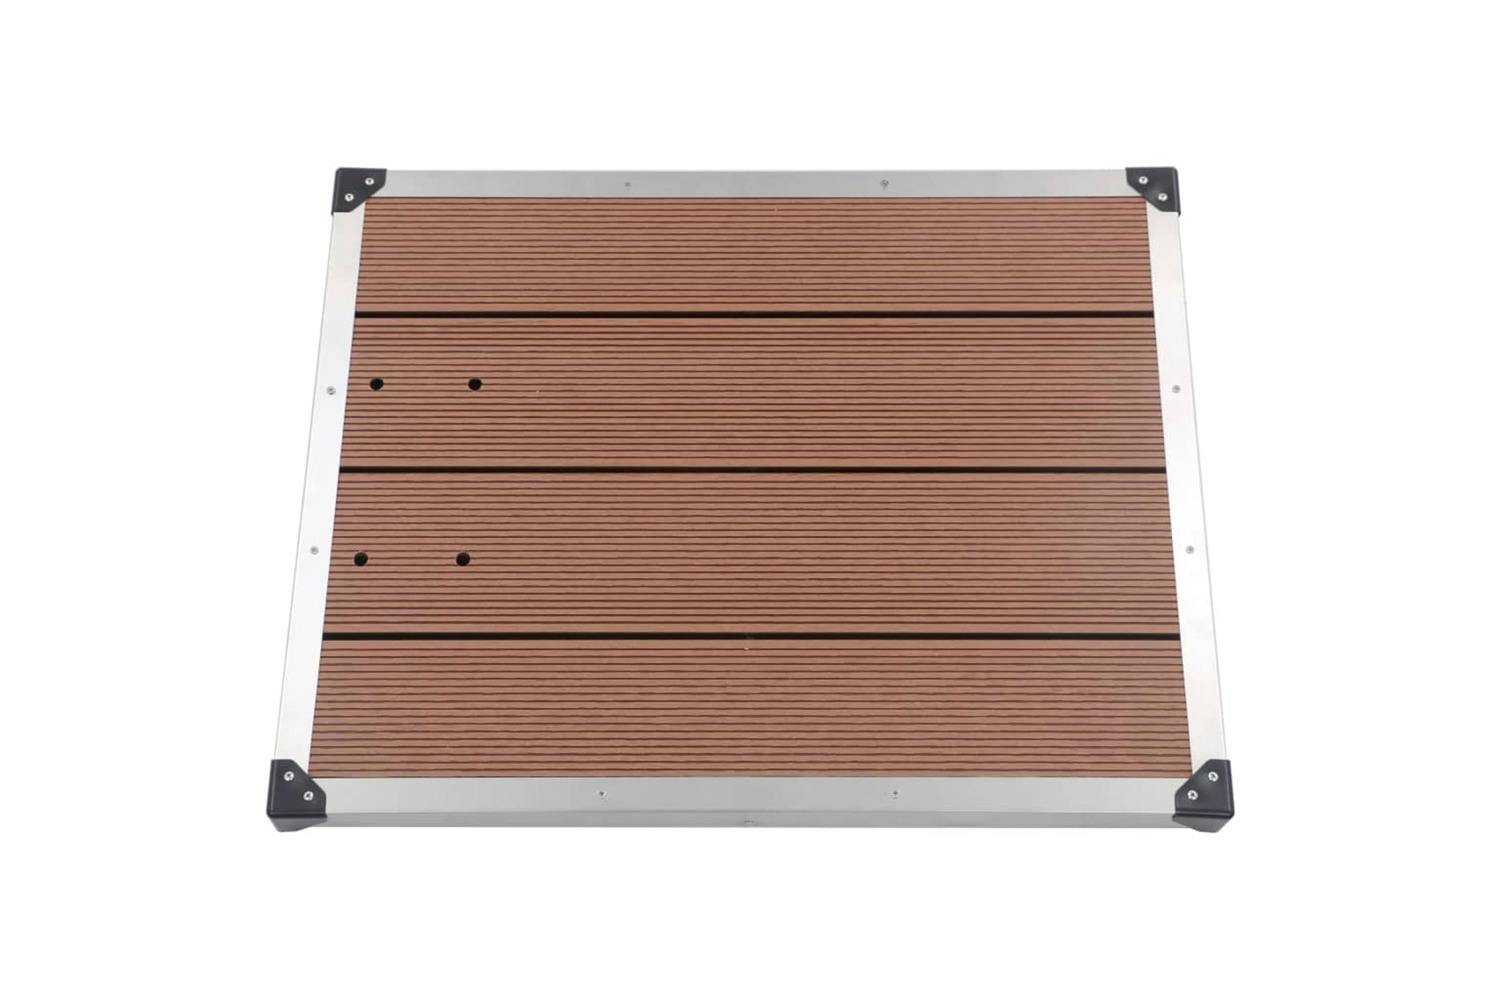 Vidaxl 48202 Outdoor Shower Tray Wpc Stainless Steel 80x62 Cm Brown